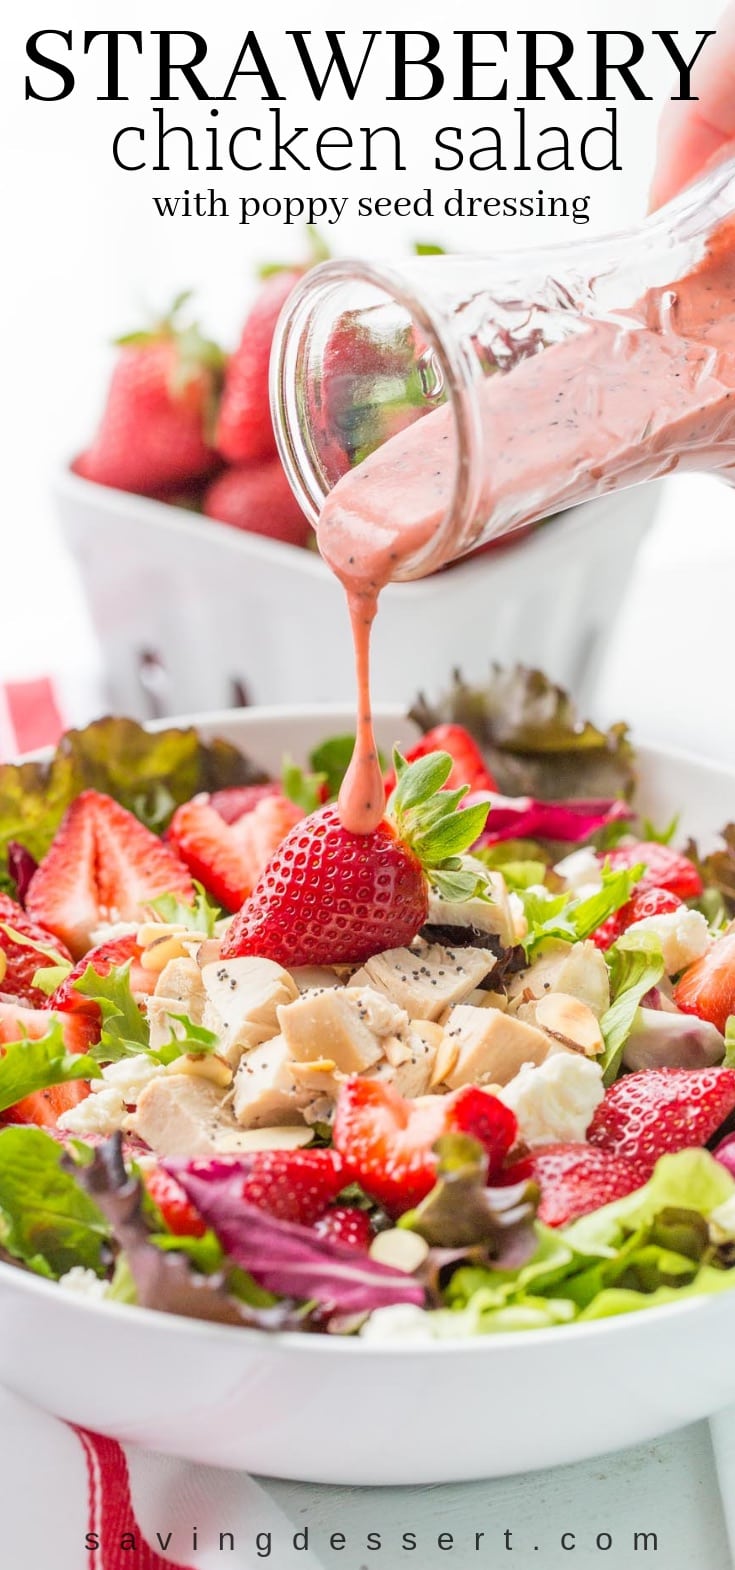 Simple and light, and deliciously refreshing ~ Strawberry Salad with Chicken and Poppy Seed Dressing is a great main course salad with an amazing combination of flavors. #salad #strawberry #strawberrychickensalad #poppyseeddressing #Maincoursesalad #strawberrysalad